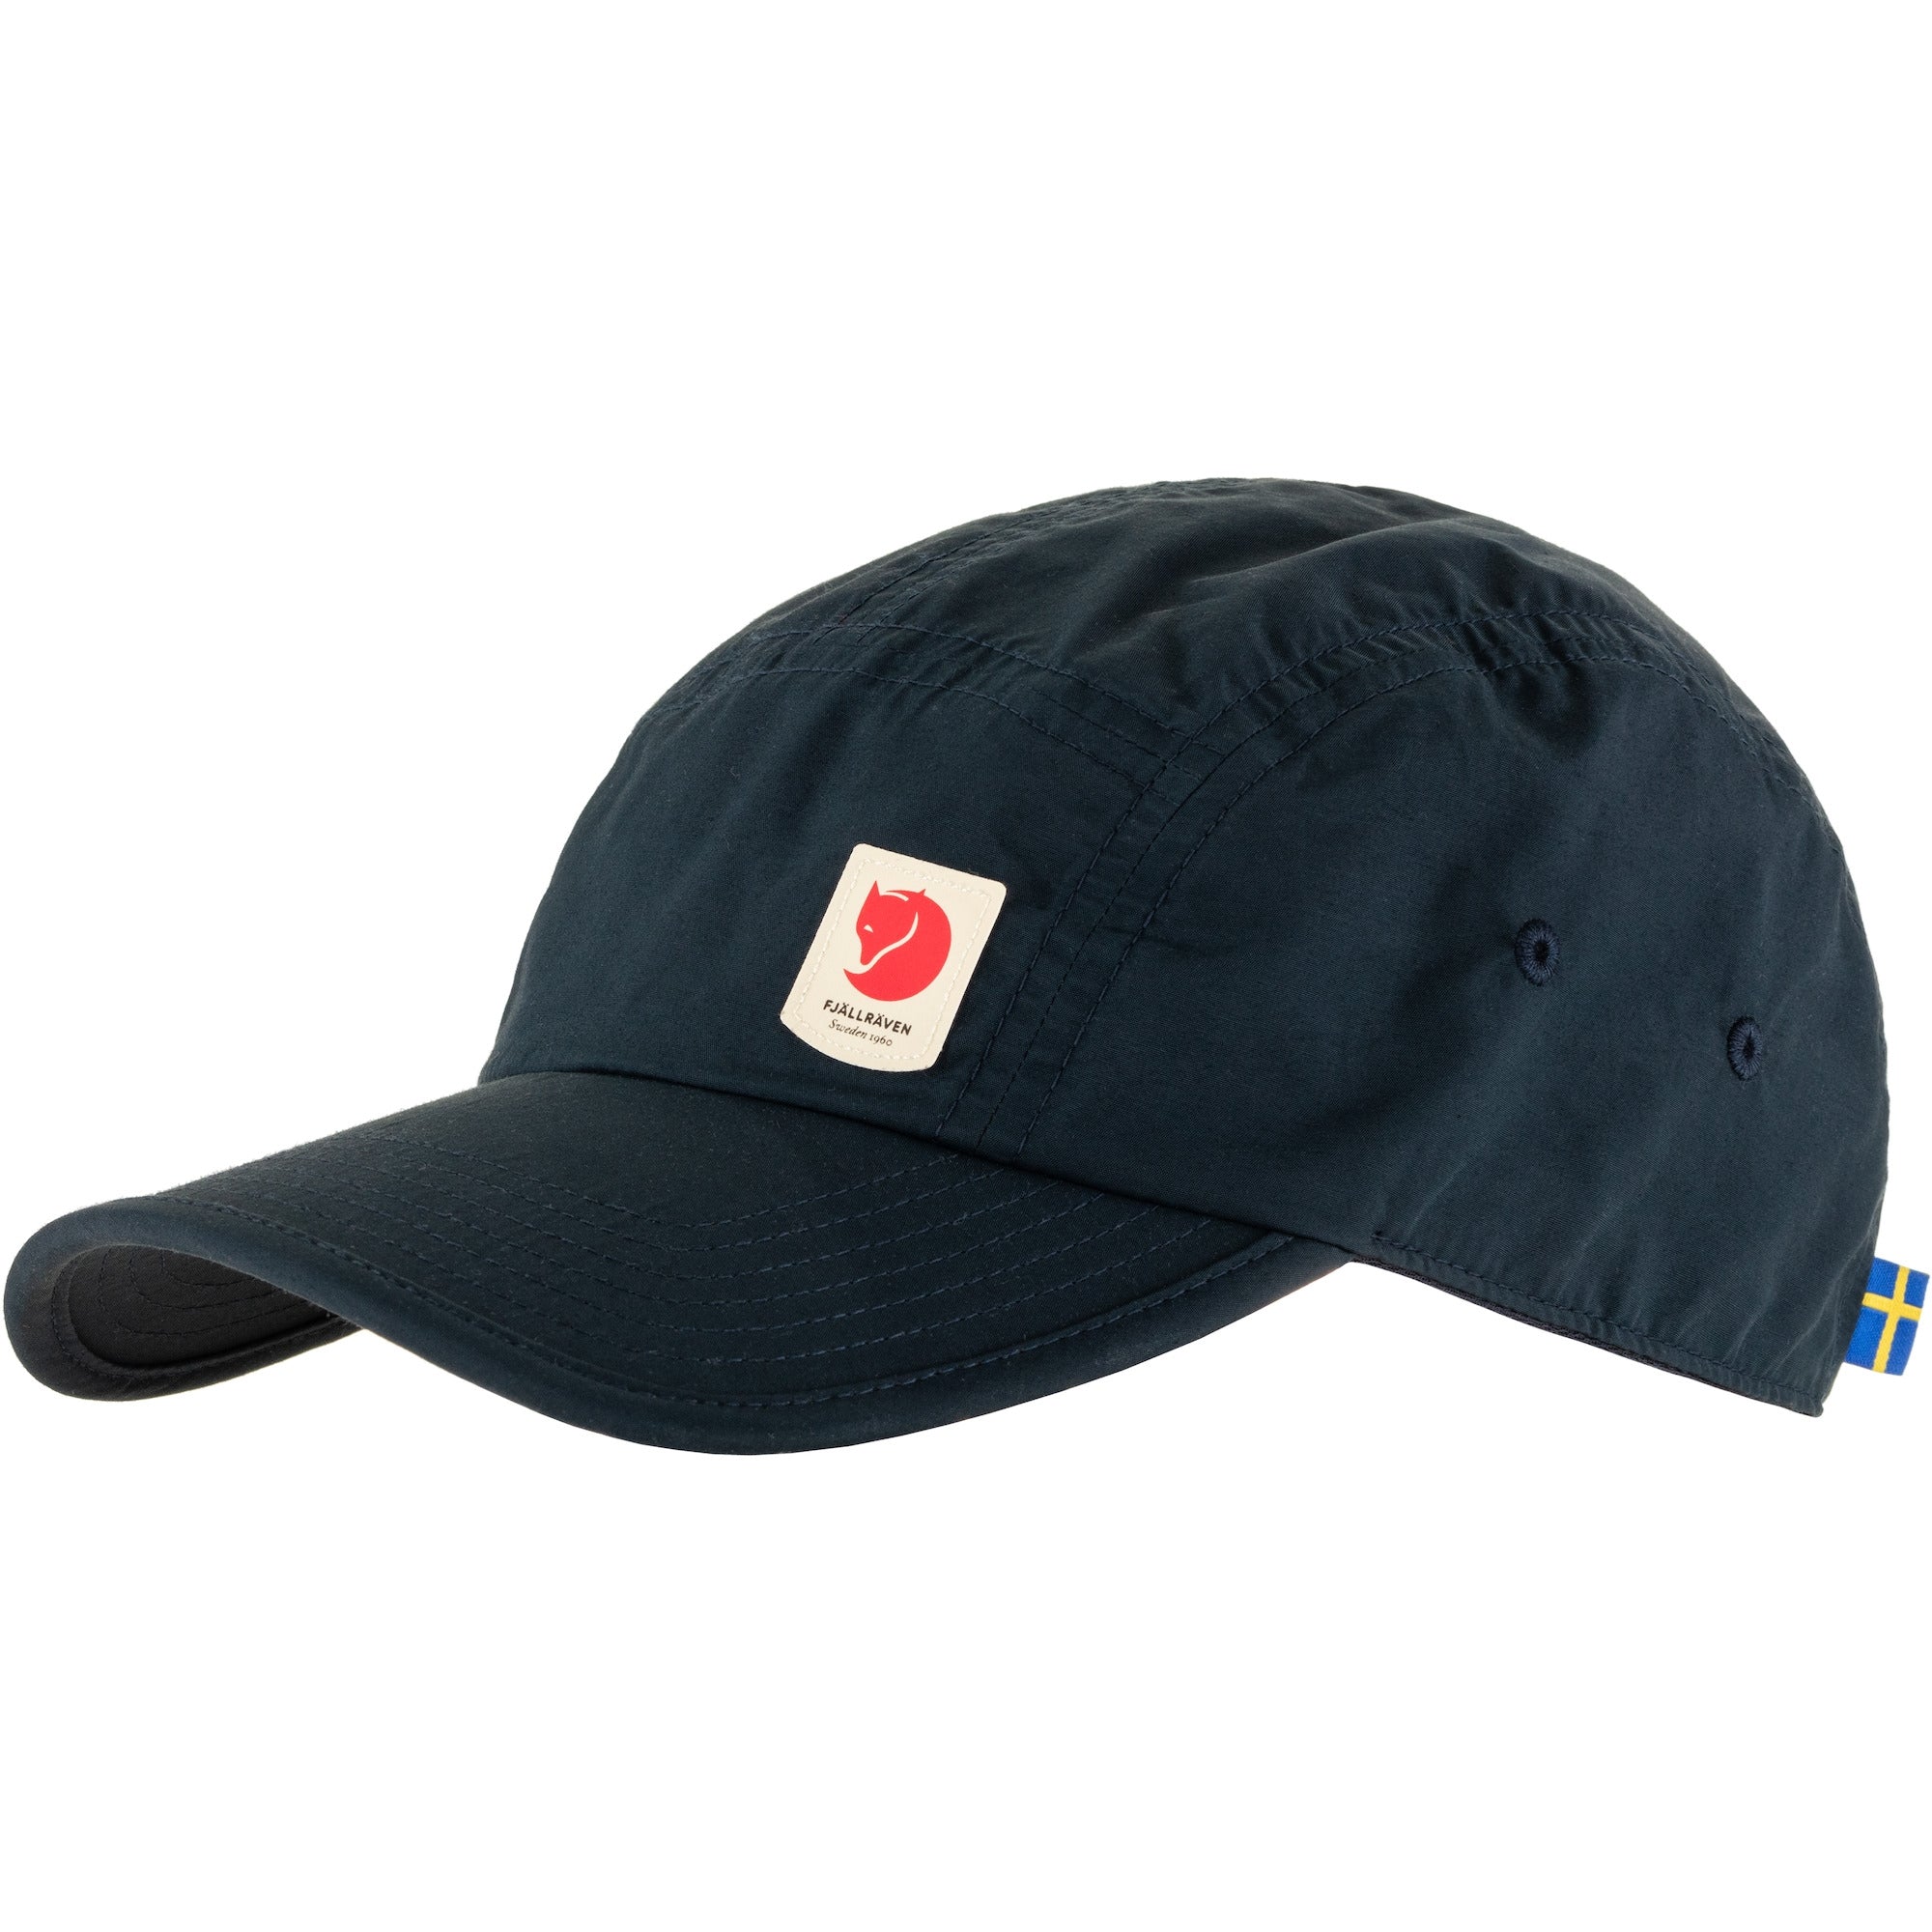 Classic navy cap stretch adjustable back and peak small logo on left front side